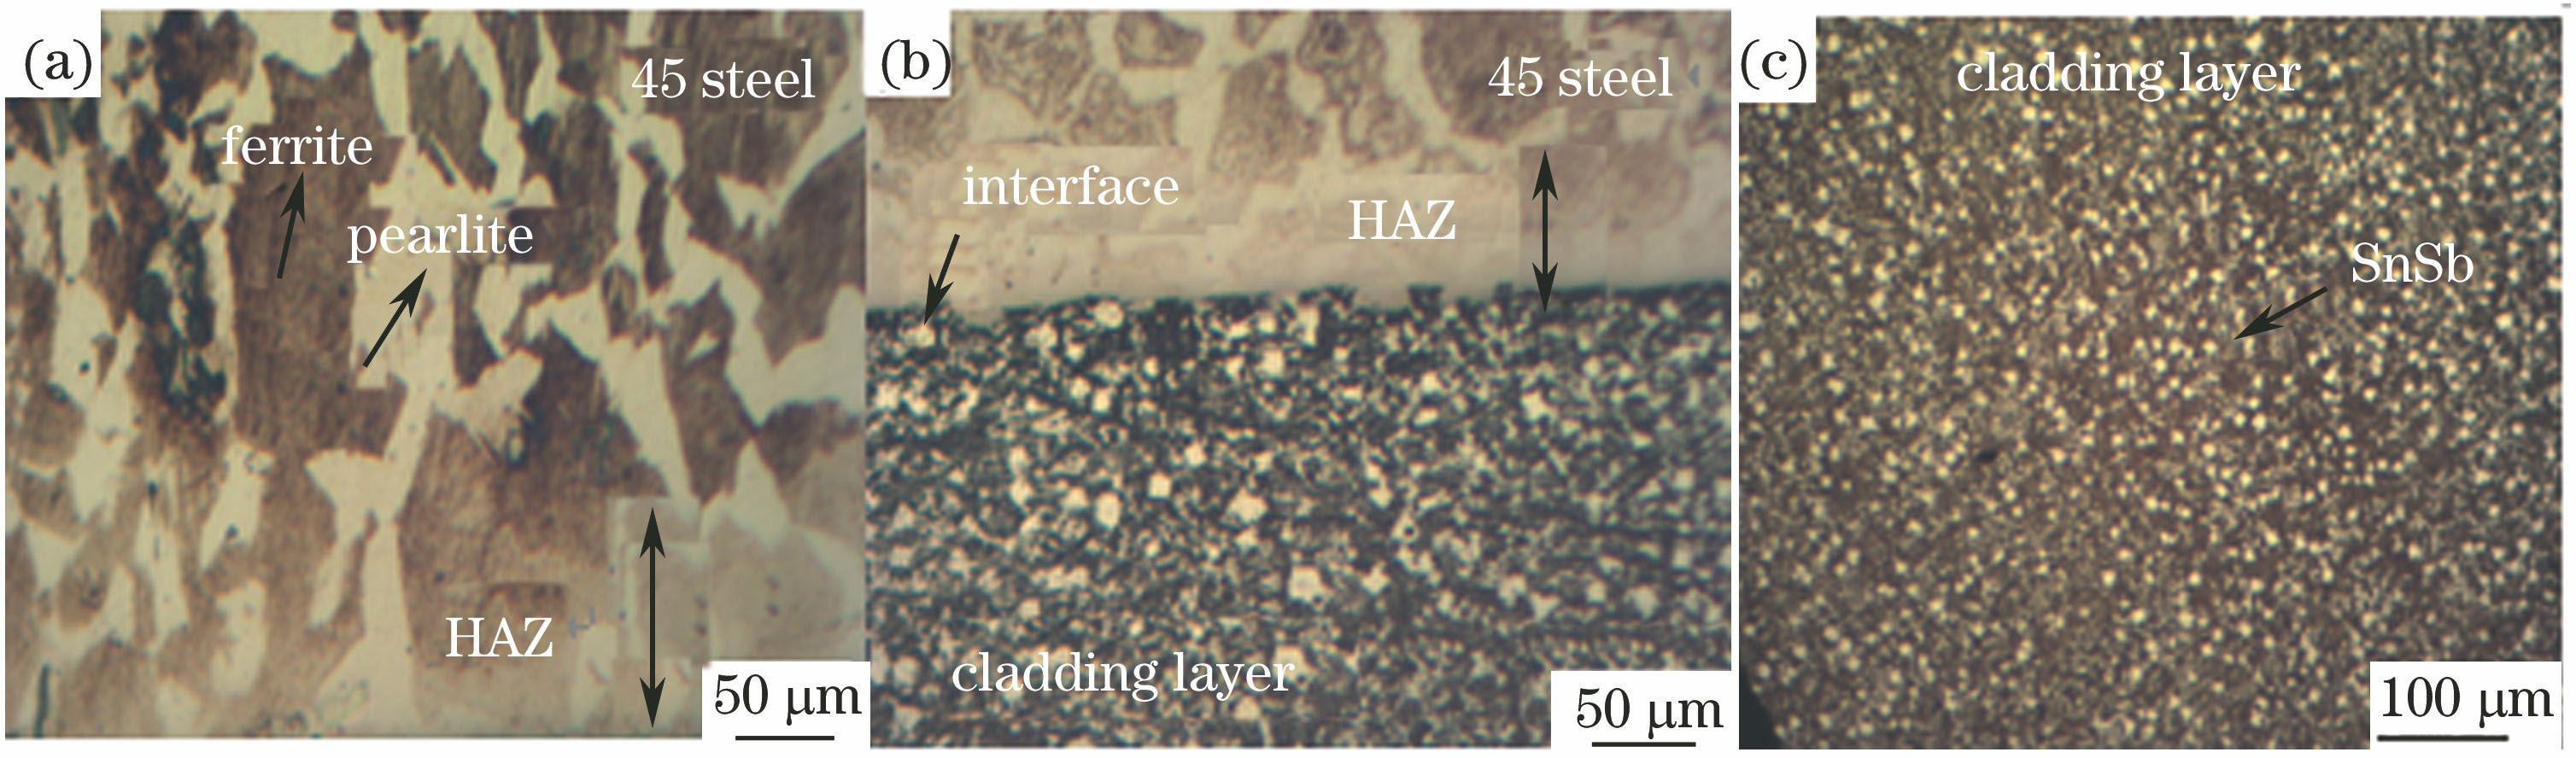 Microstructures and morphologies of laser cladding tin-based Babbitt alloy in different positions. (a) 45 steel; (b) heat affected zone; (c) cladding layer of nickel/tin-based Babbitt alloy